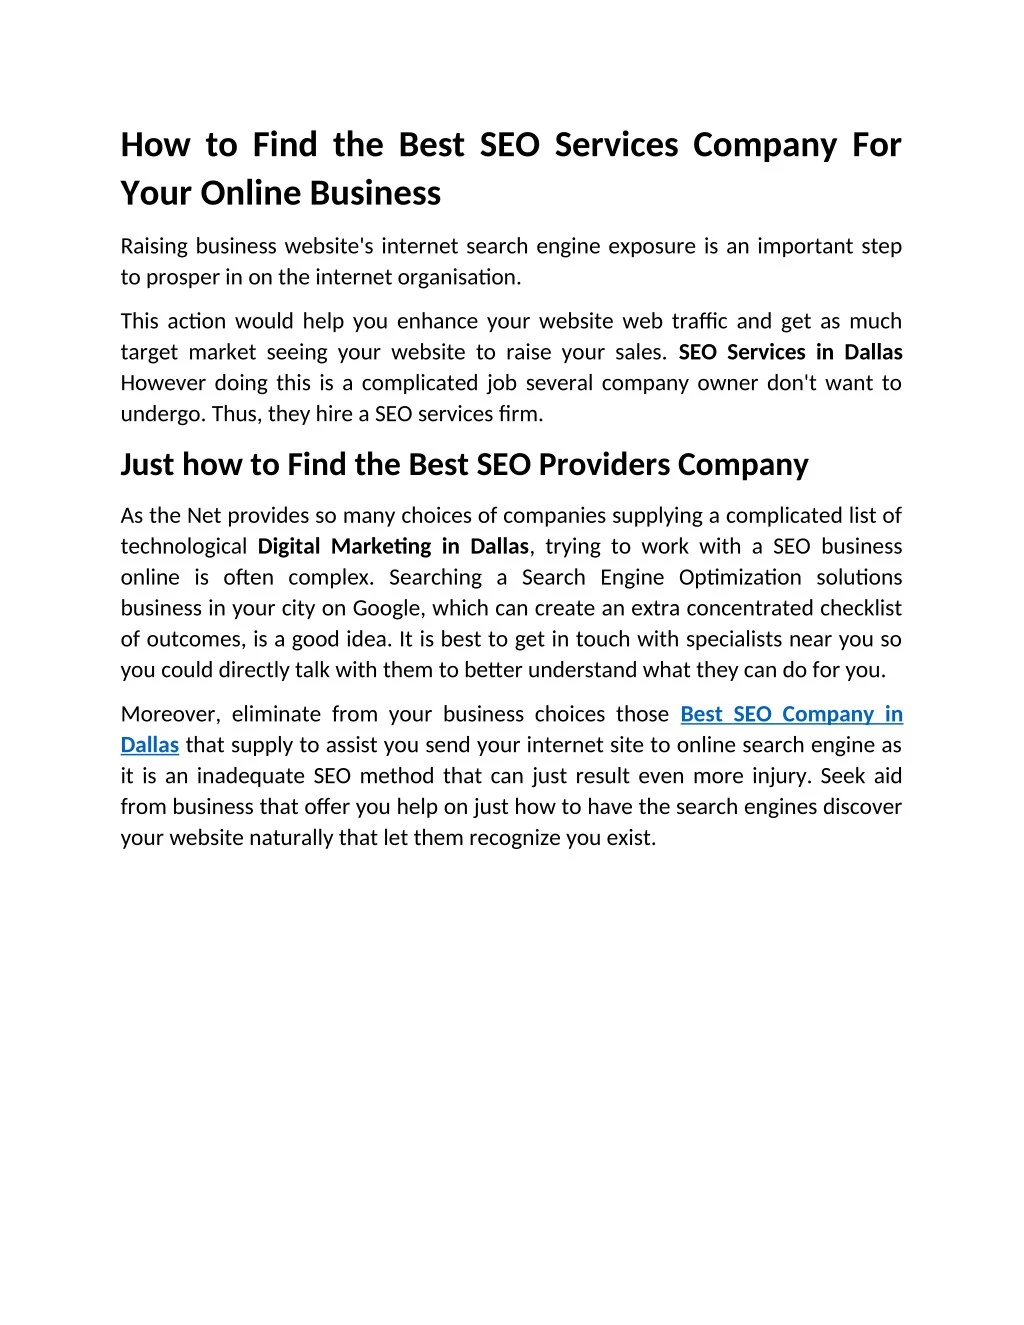 how to find the best seo services company